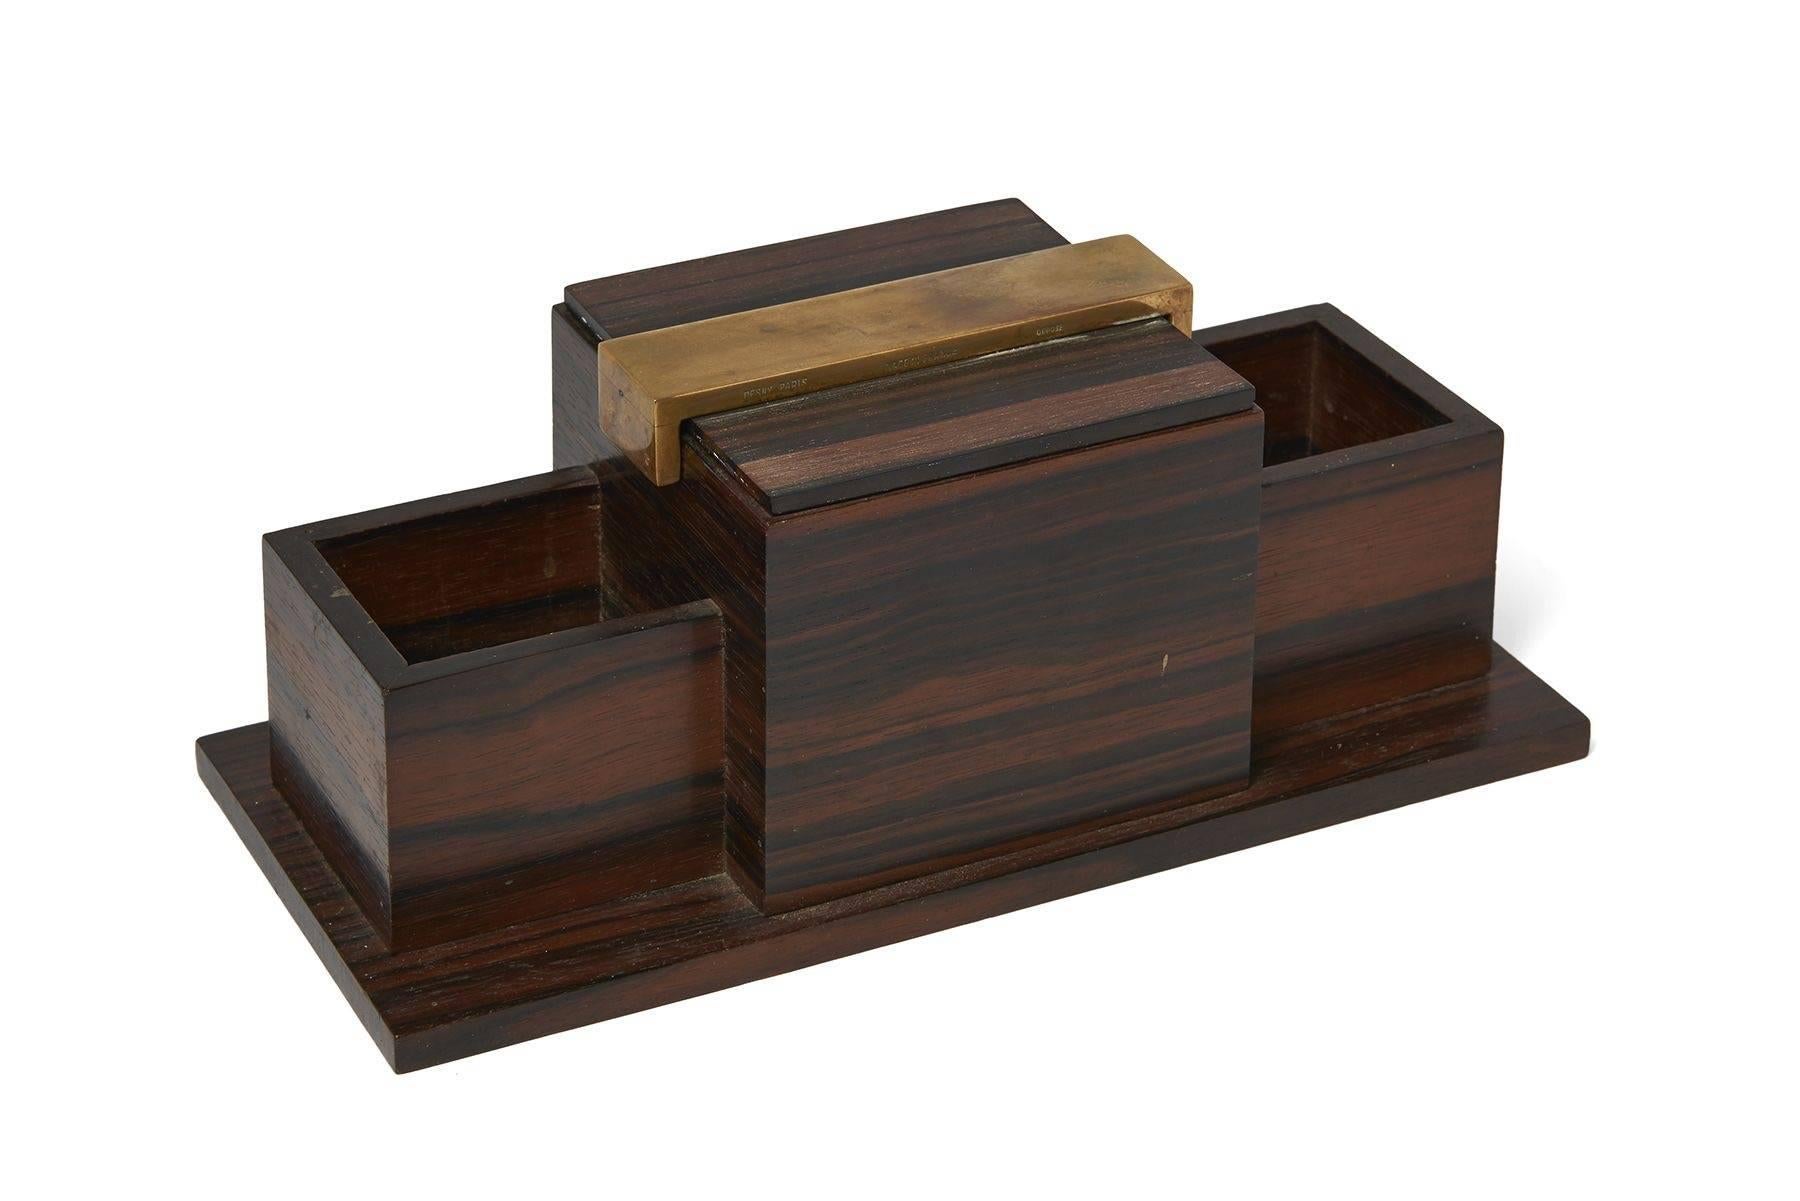 Pin tray in Macassar ebony veneer and brass. Stamped with 